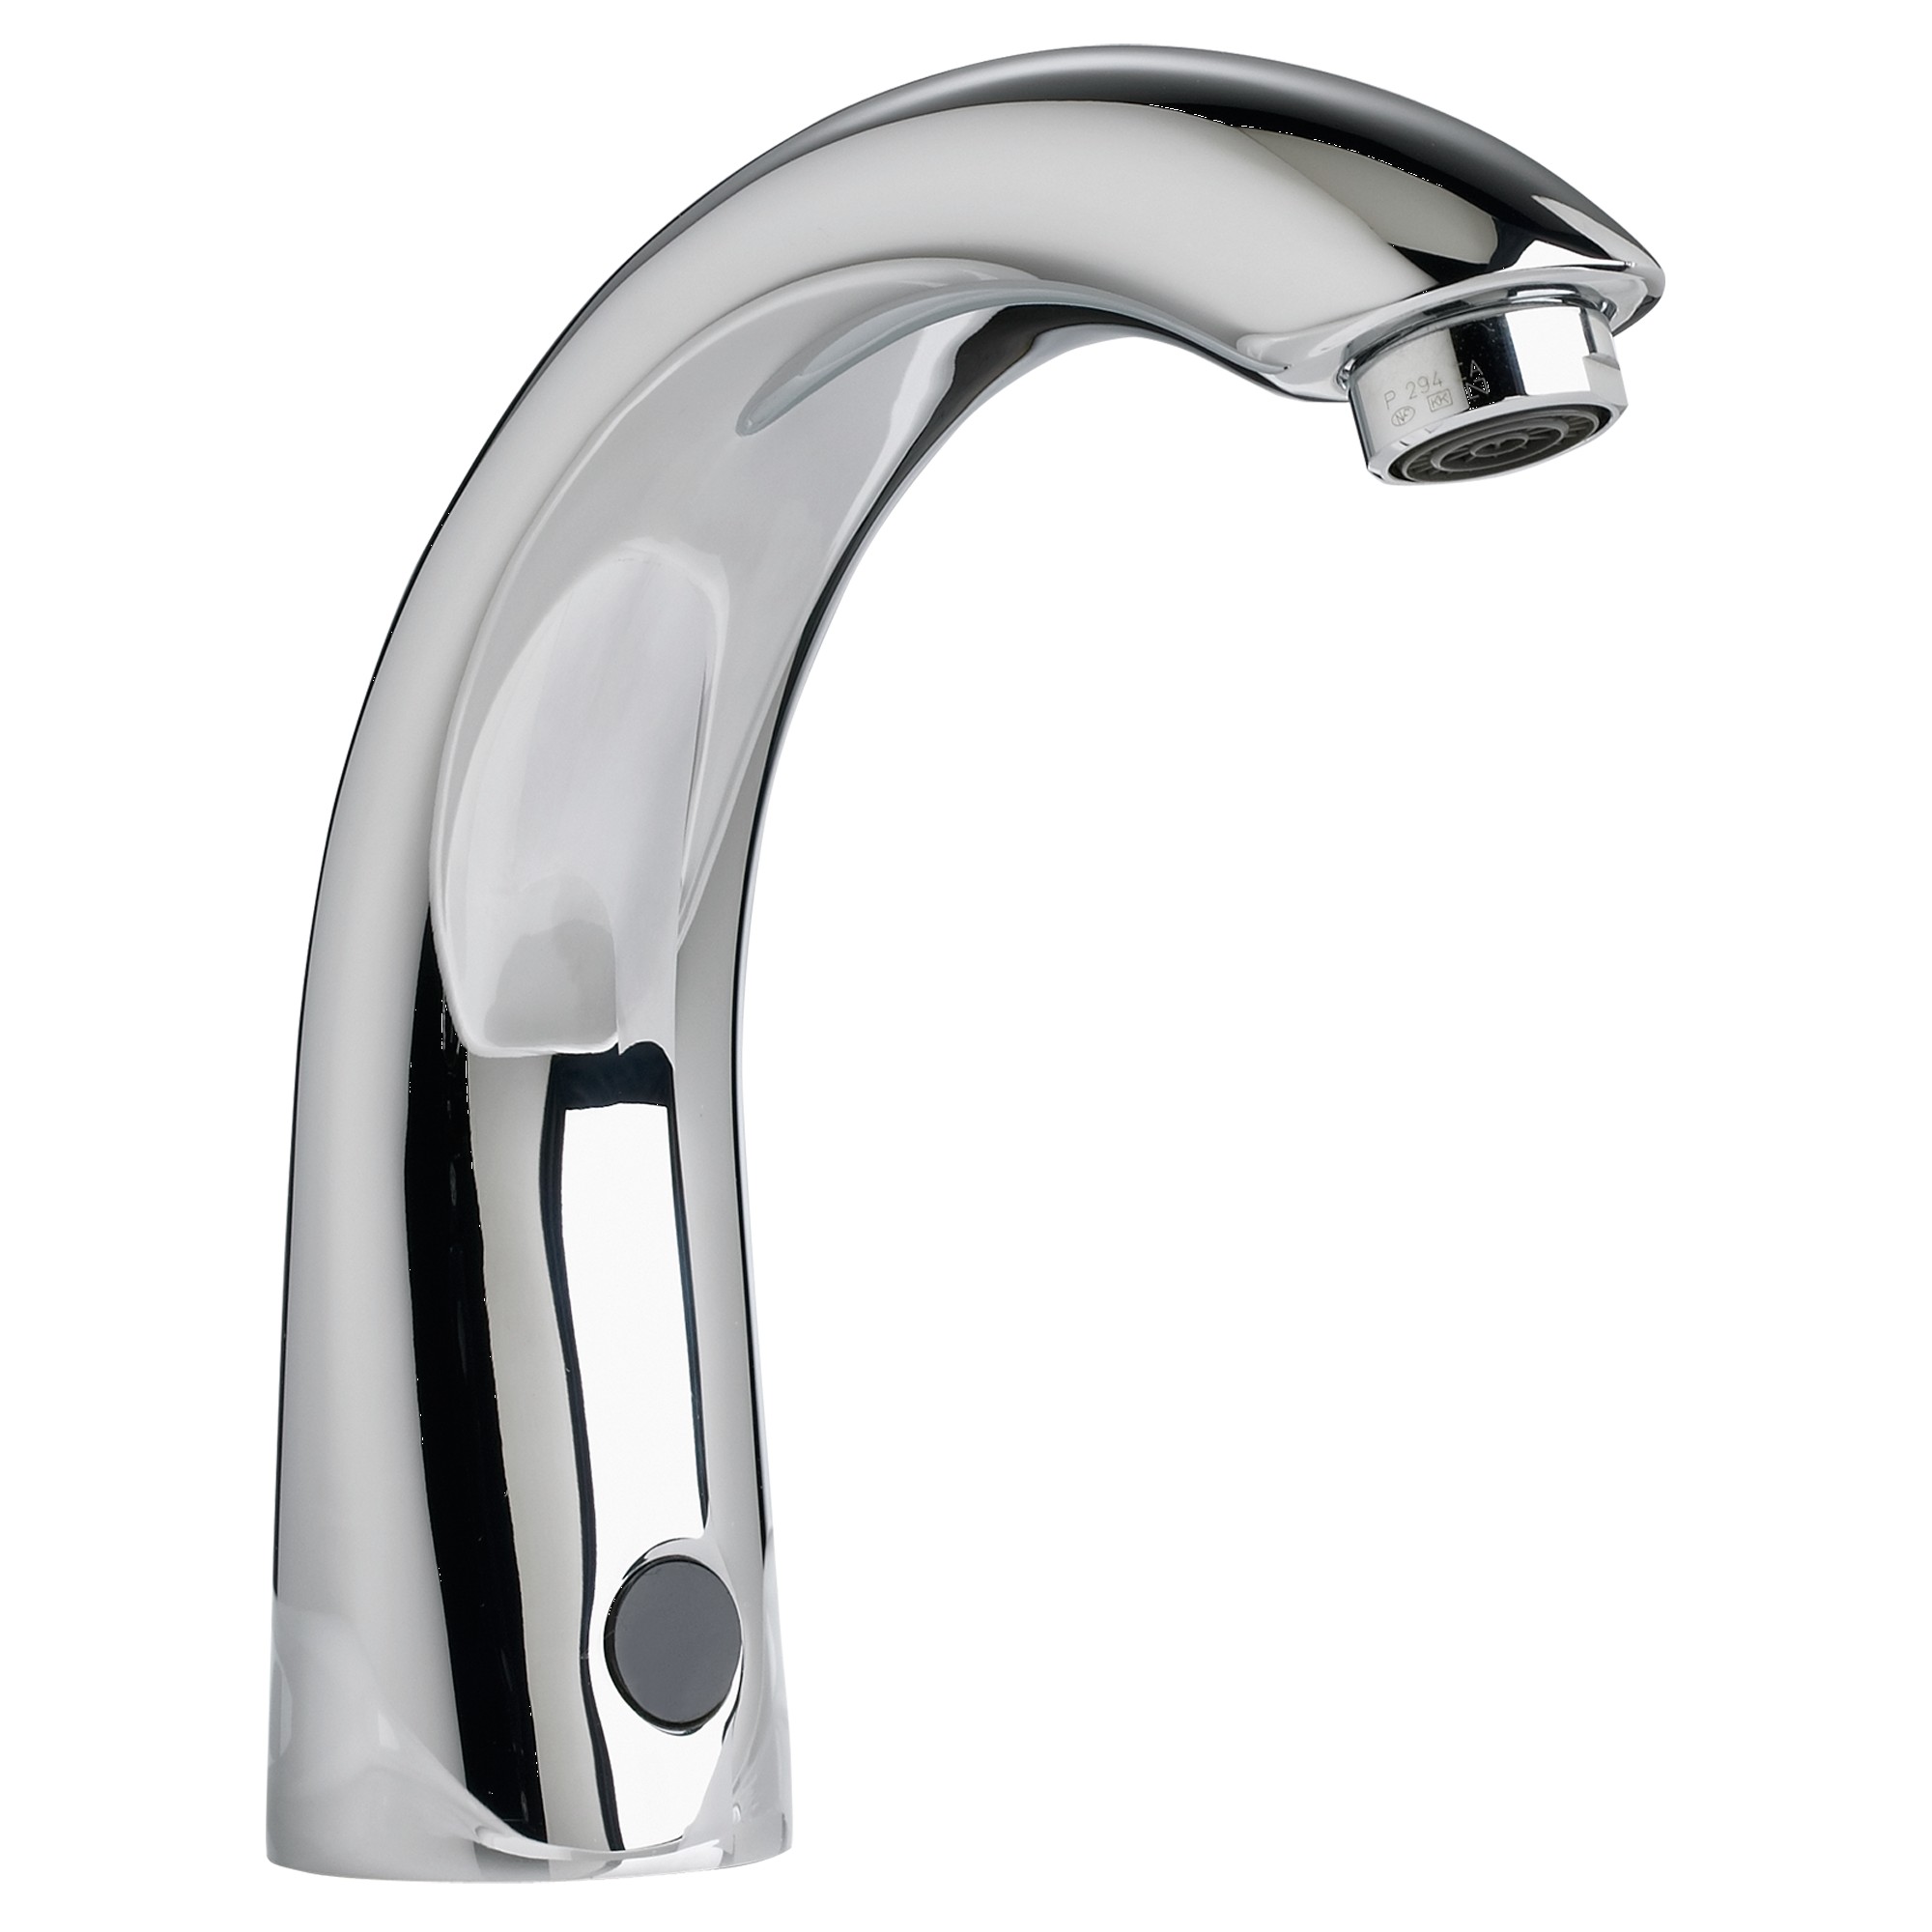 American Standard | 6055.105.002 | AMERICAN STANDARD 6055.105 SELECTRONIC DC ELECTRONIC FAUCET CP 002 CHROME .5GPM